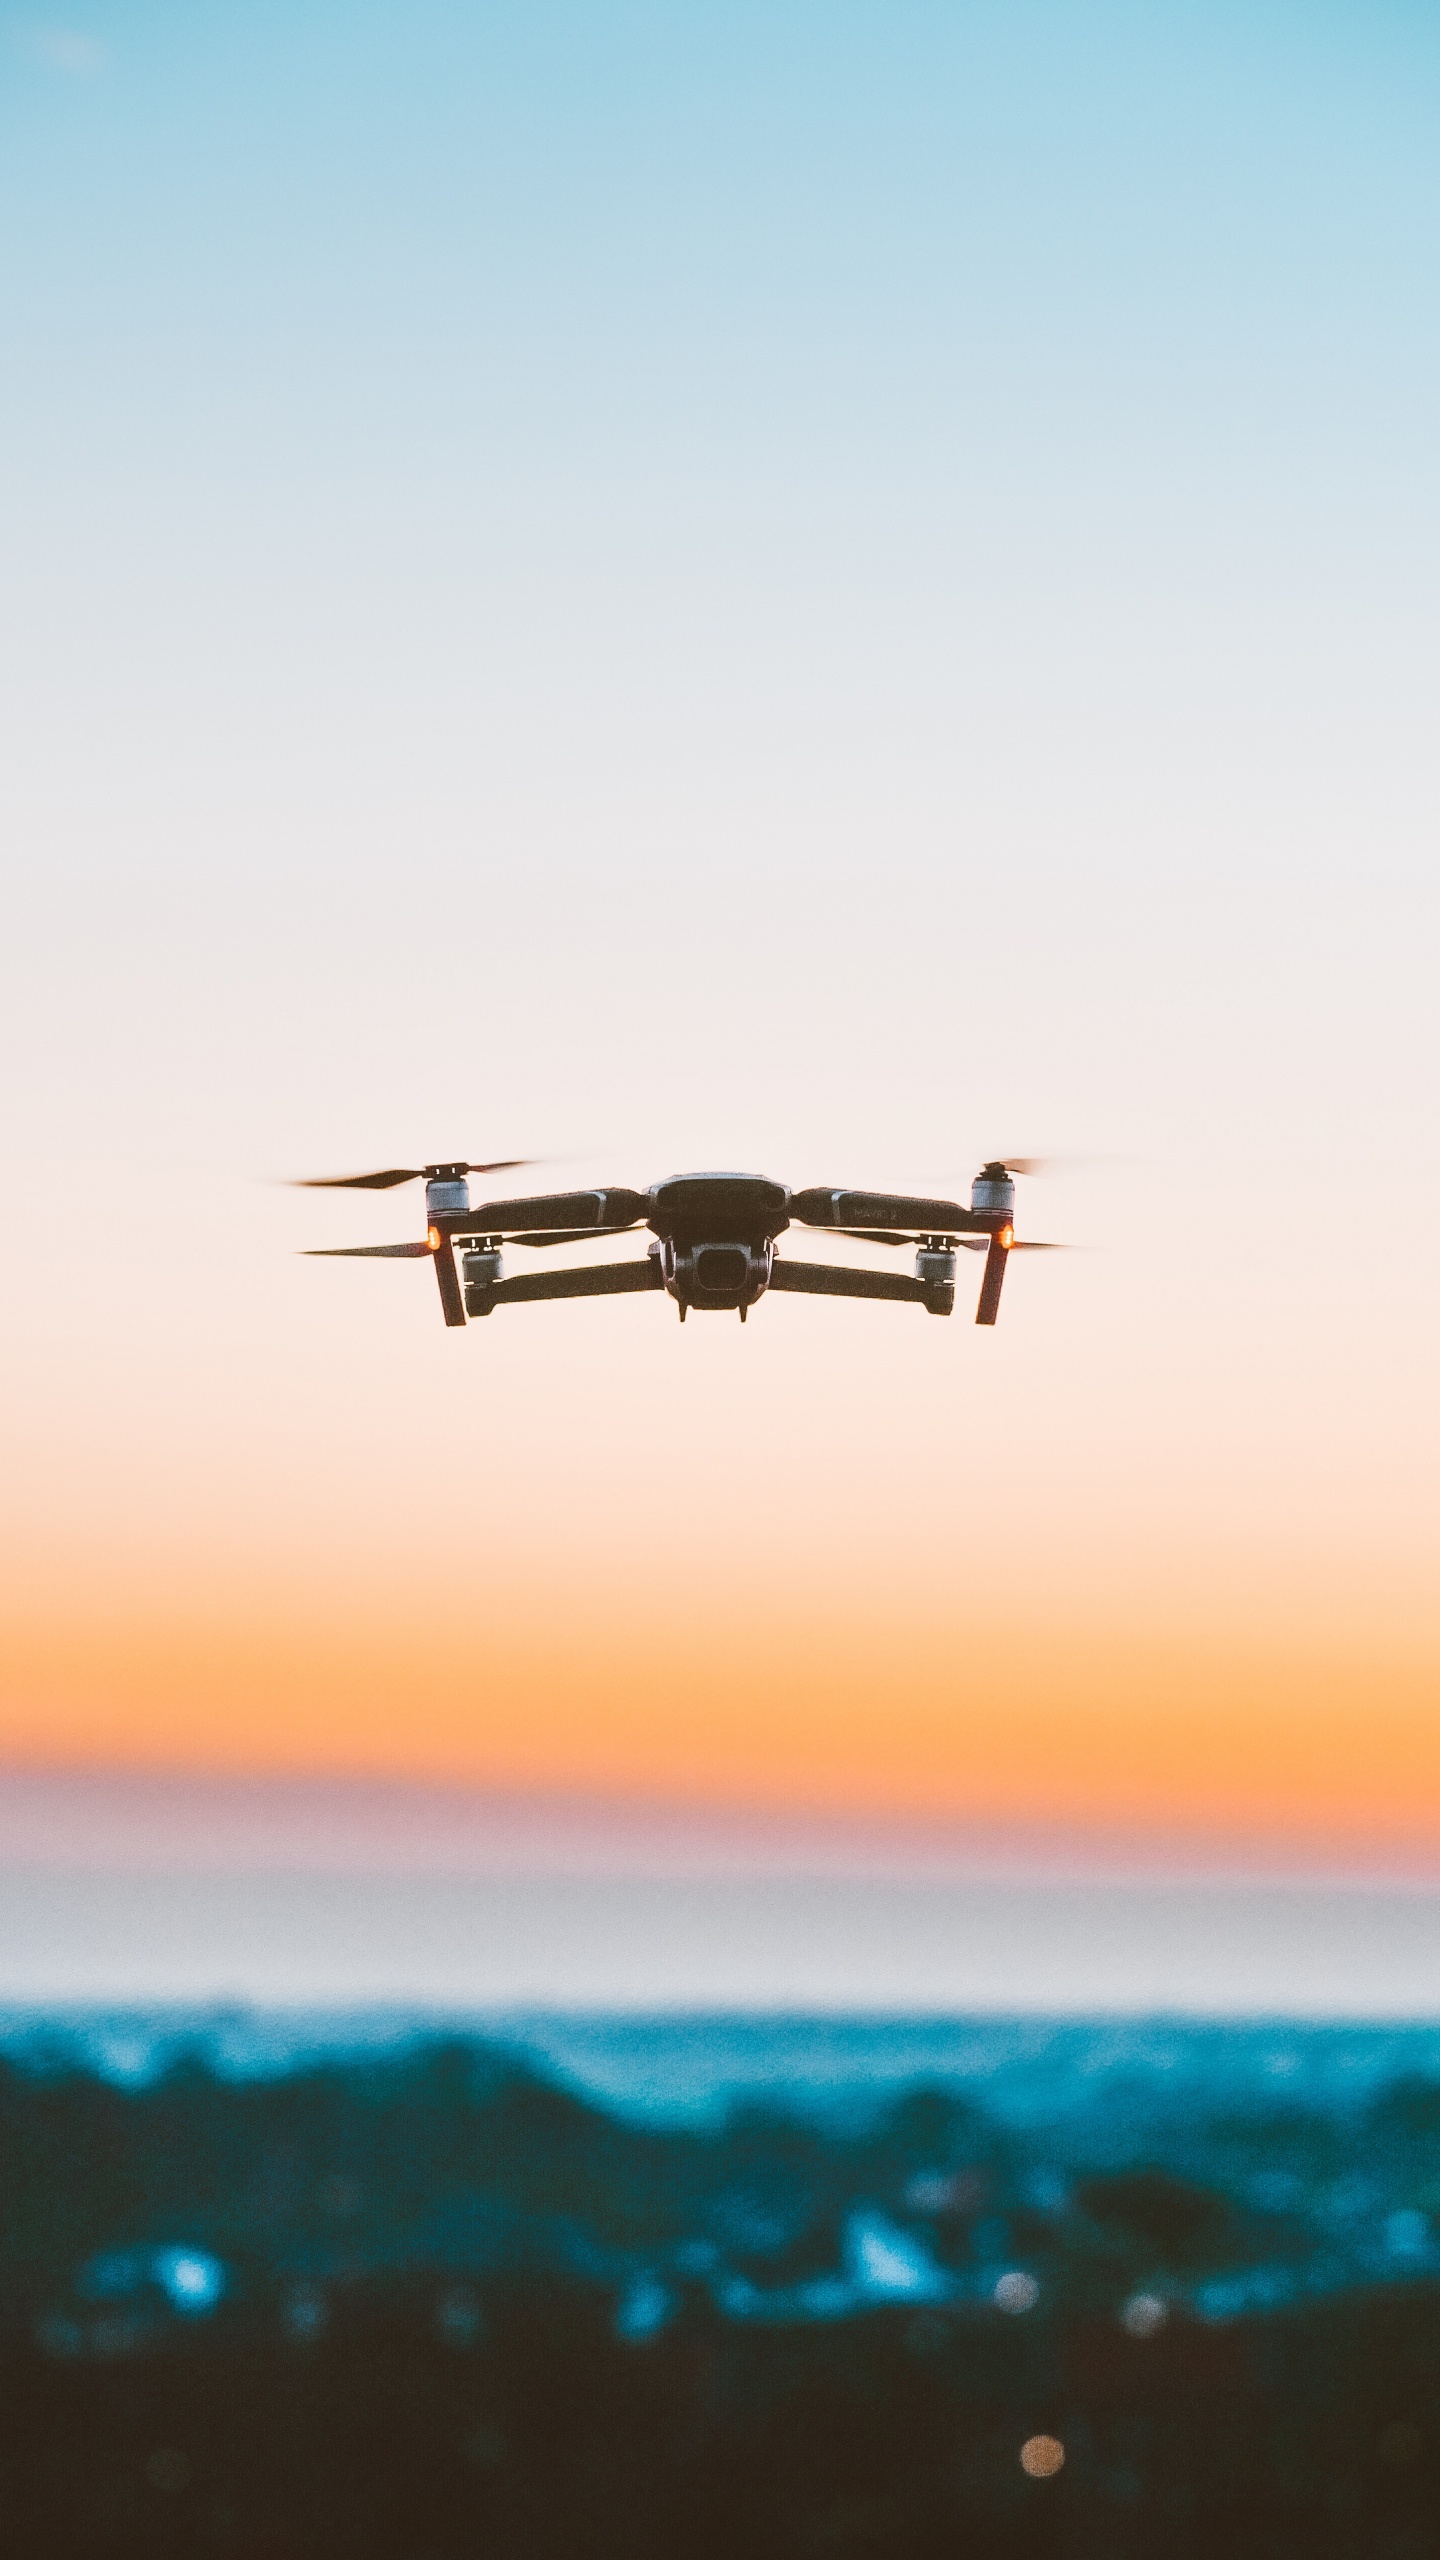 Black Drone Flying Over The Sea During Sunset. Wallpaper in 1440x2560 Resolution